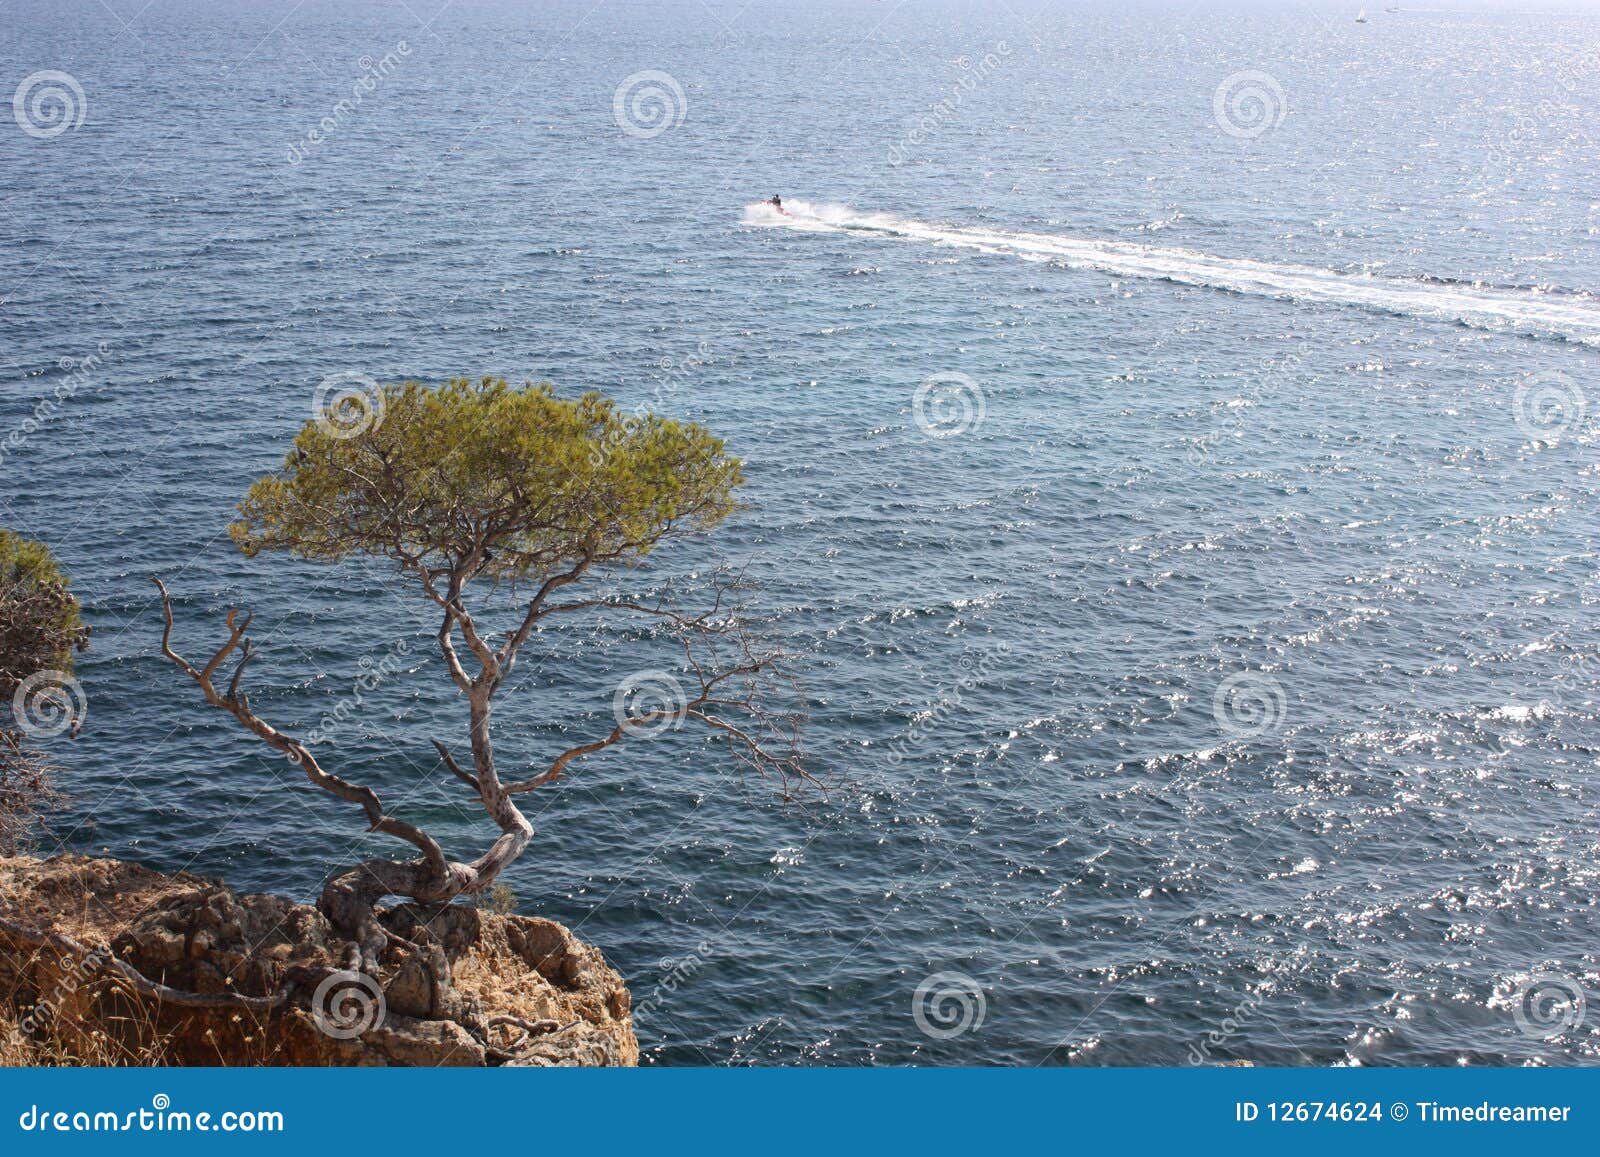 Pines beside the sea stock photo. Image of nature, pines - 12674624